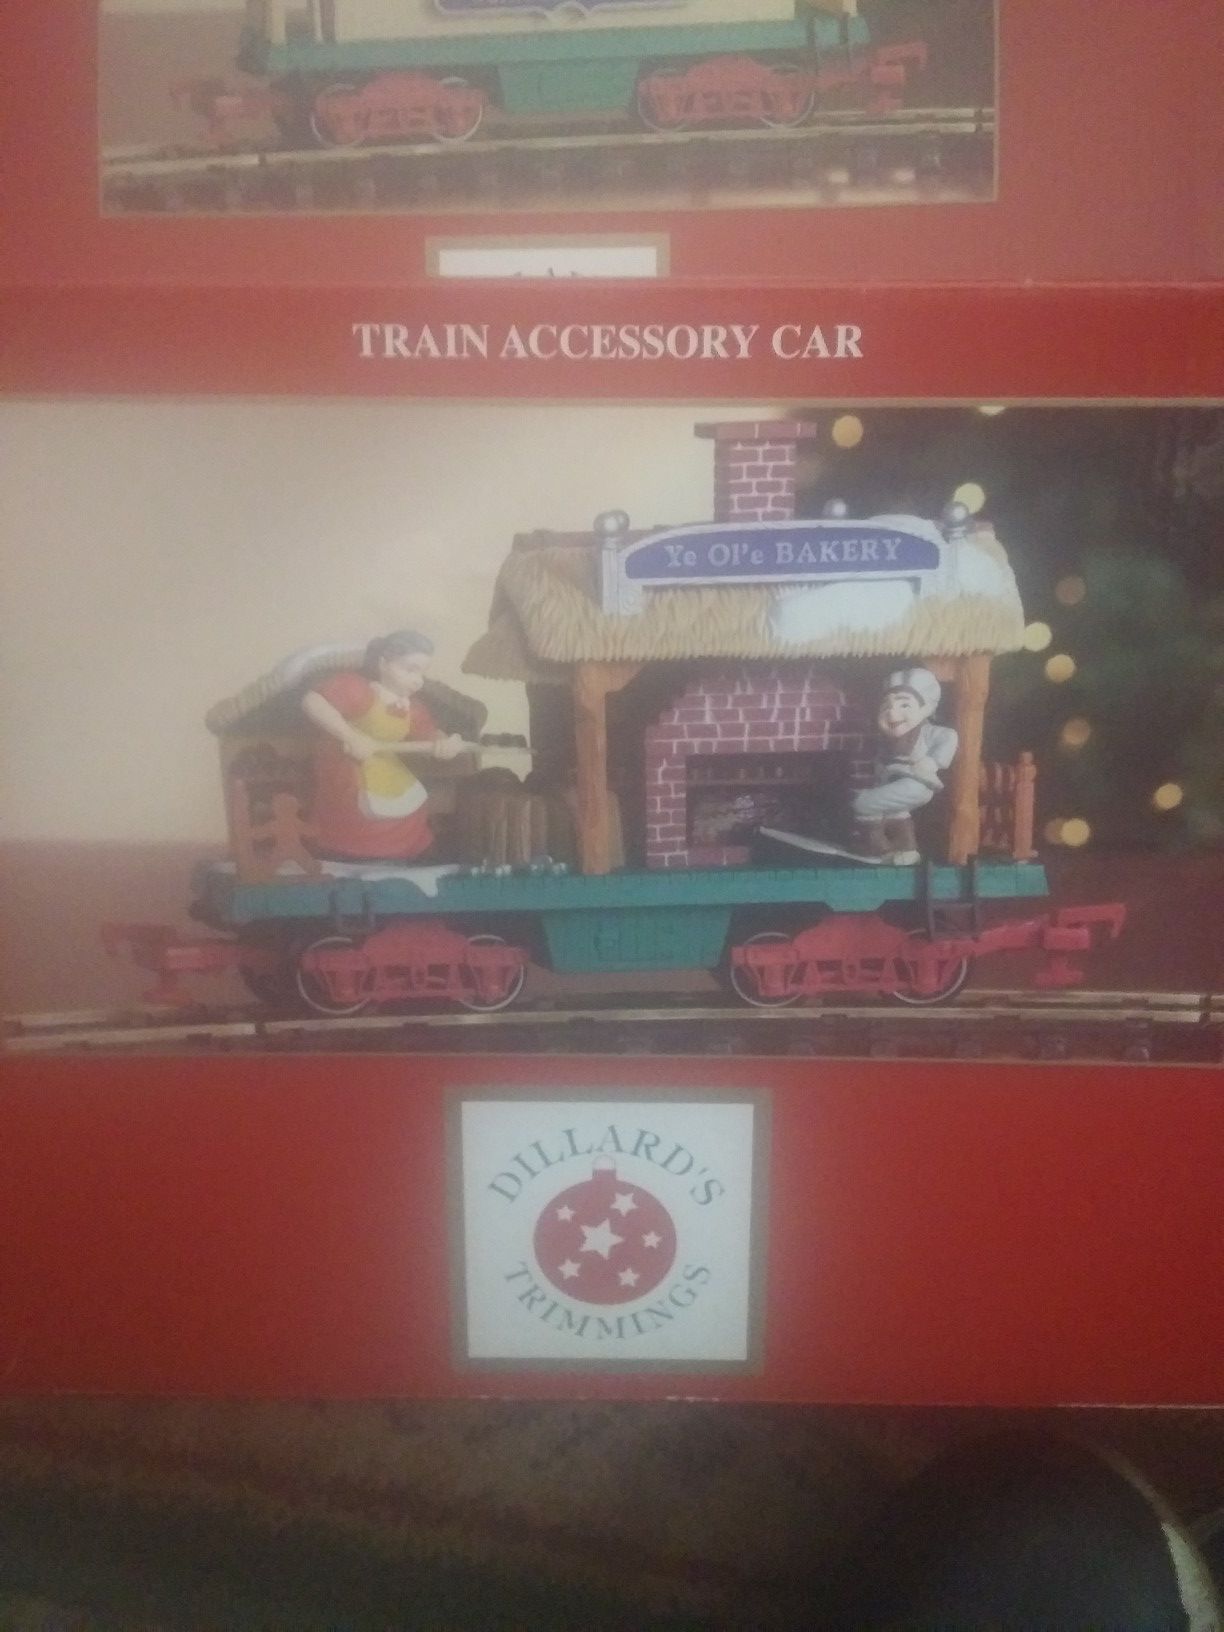 3 train accessory cars for Christmas